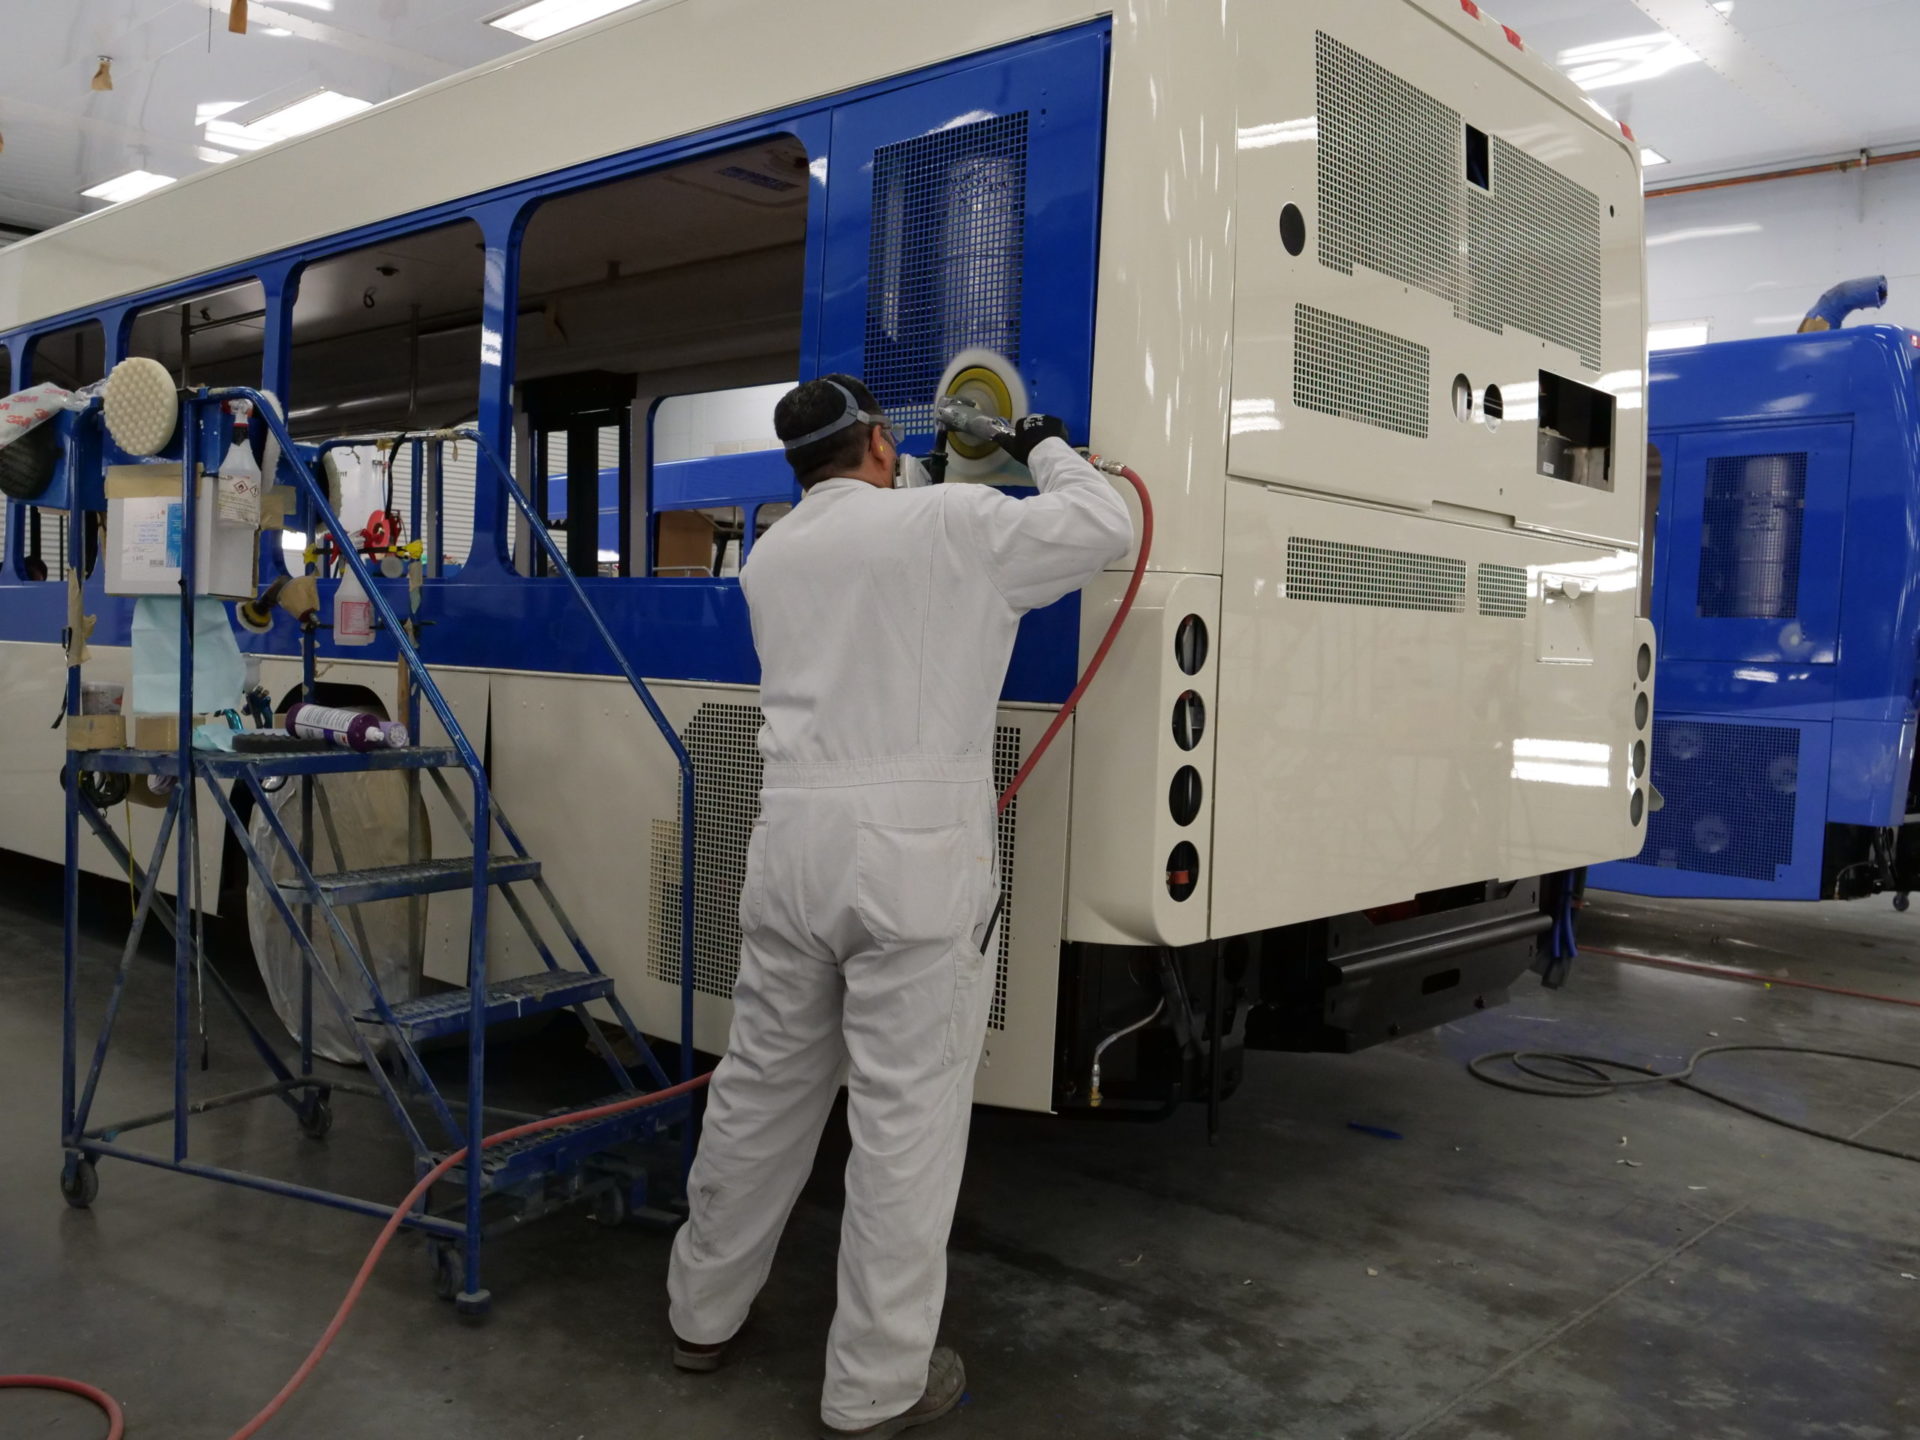 Image from the Gallery: Gillig Corporation – Livermore, CA